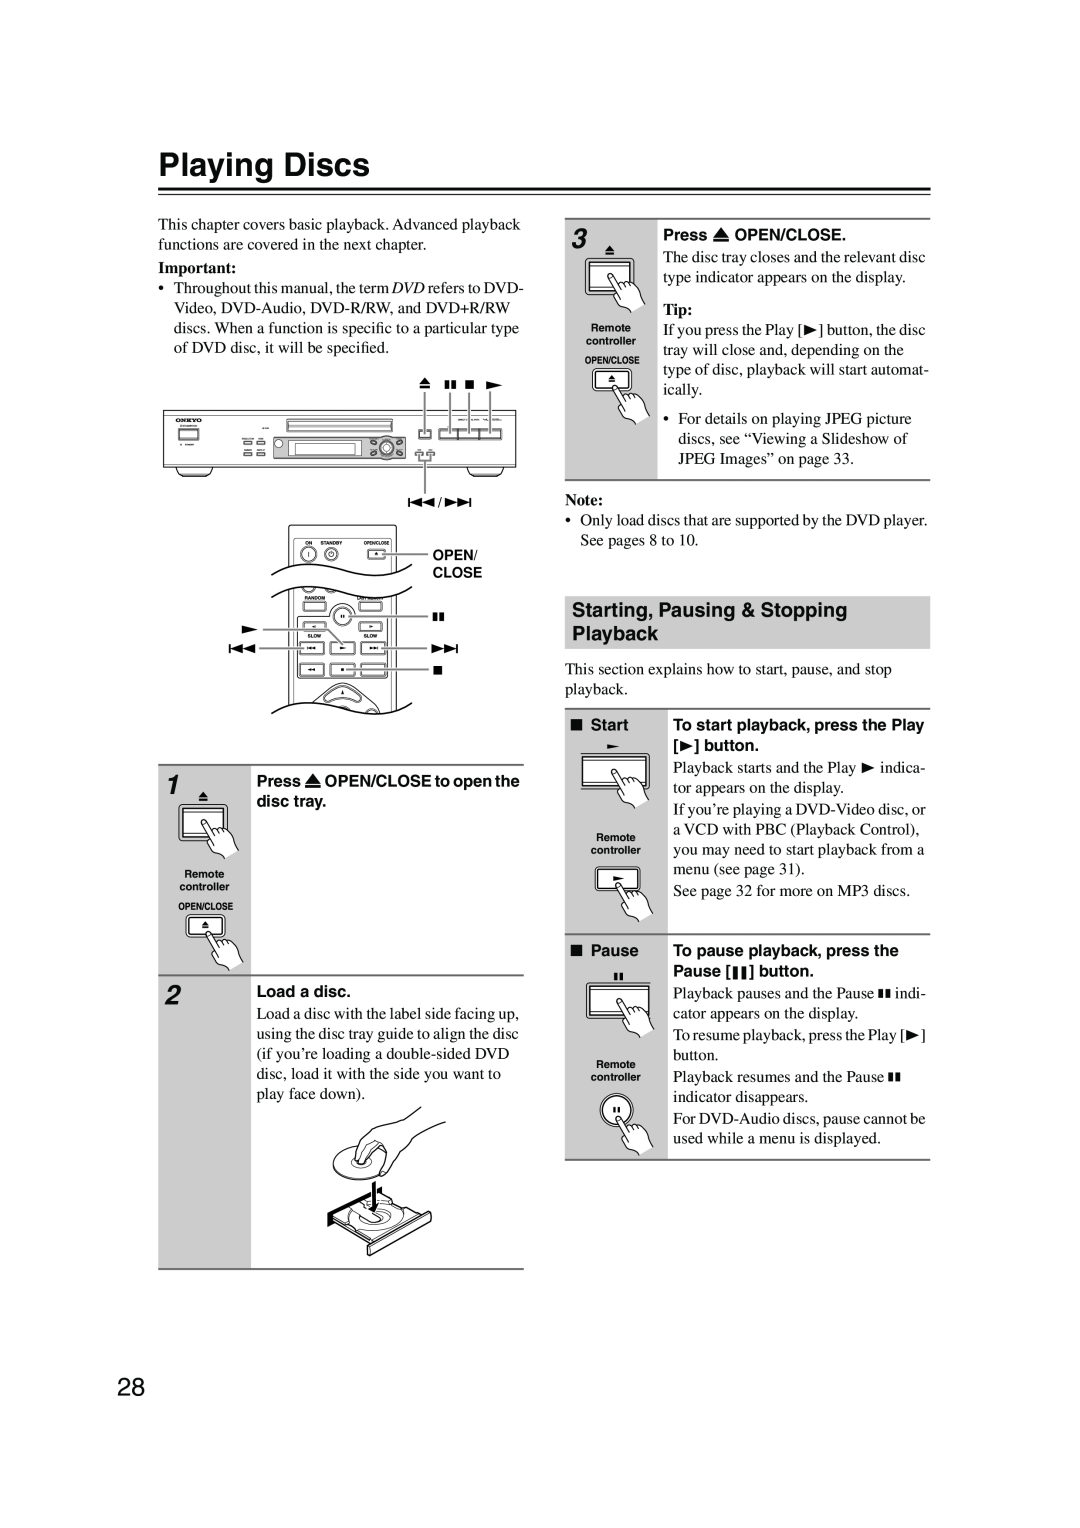 Onkyo DV-SP504E instruction manual Playing Discs, Starting, Pausing & Stopping Playback 